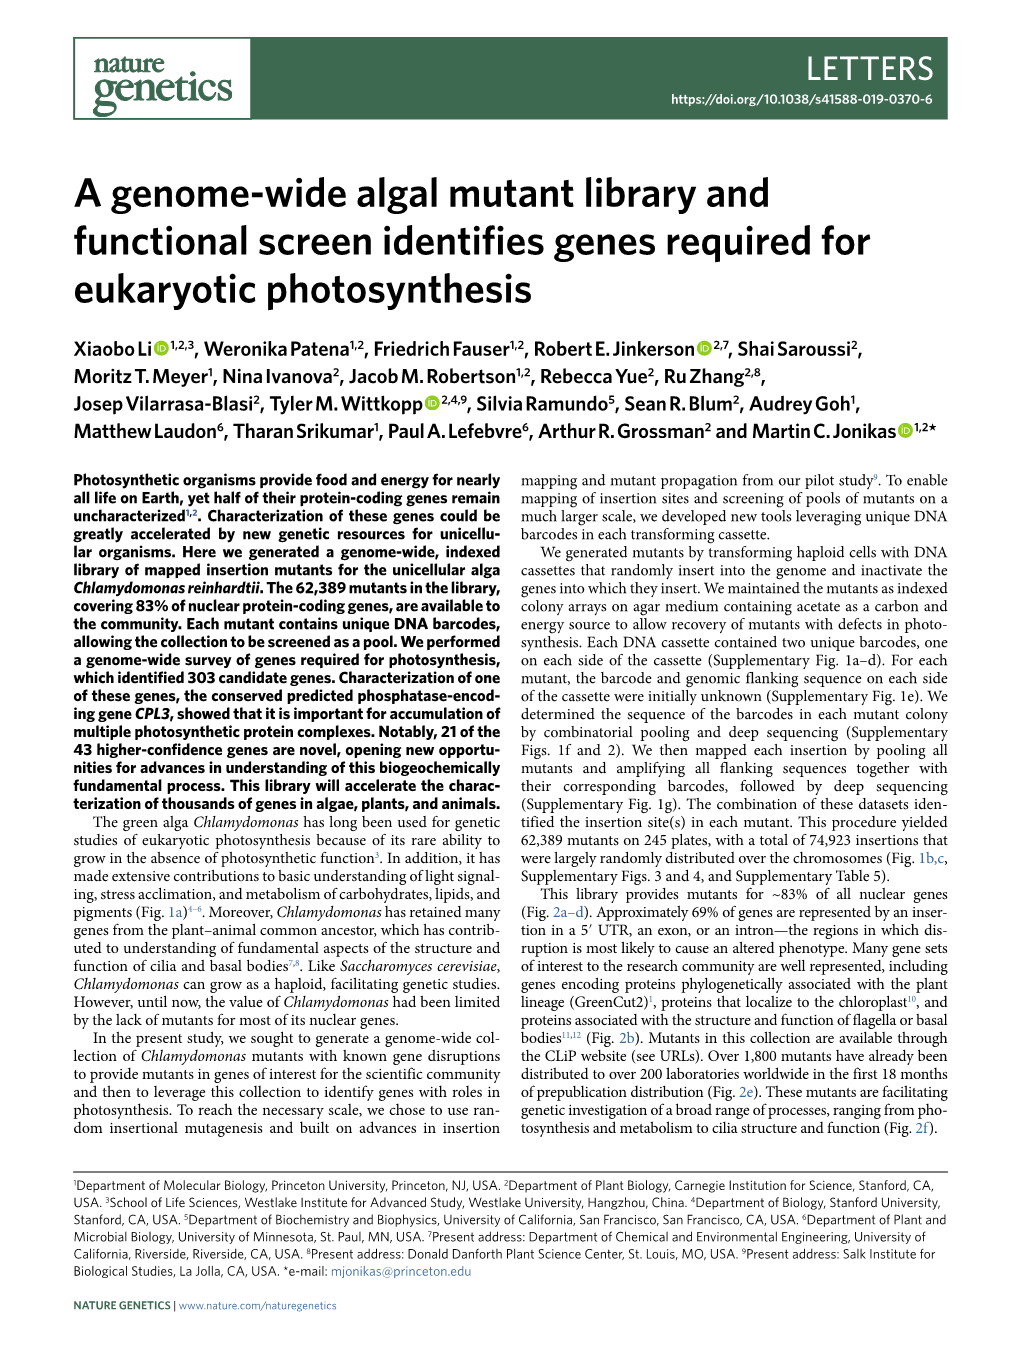 A Genome-Wide Algal Mutant Library and Functional Screen Identifies Genes Required for Eukaryotic Photosynthesis